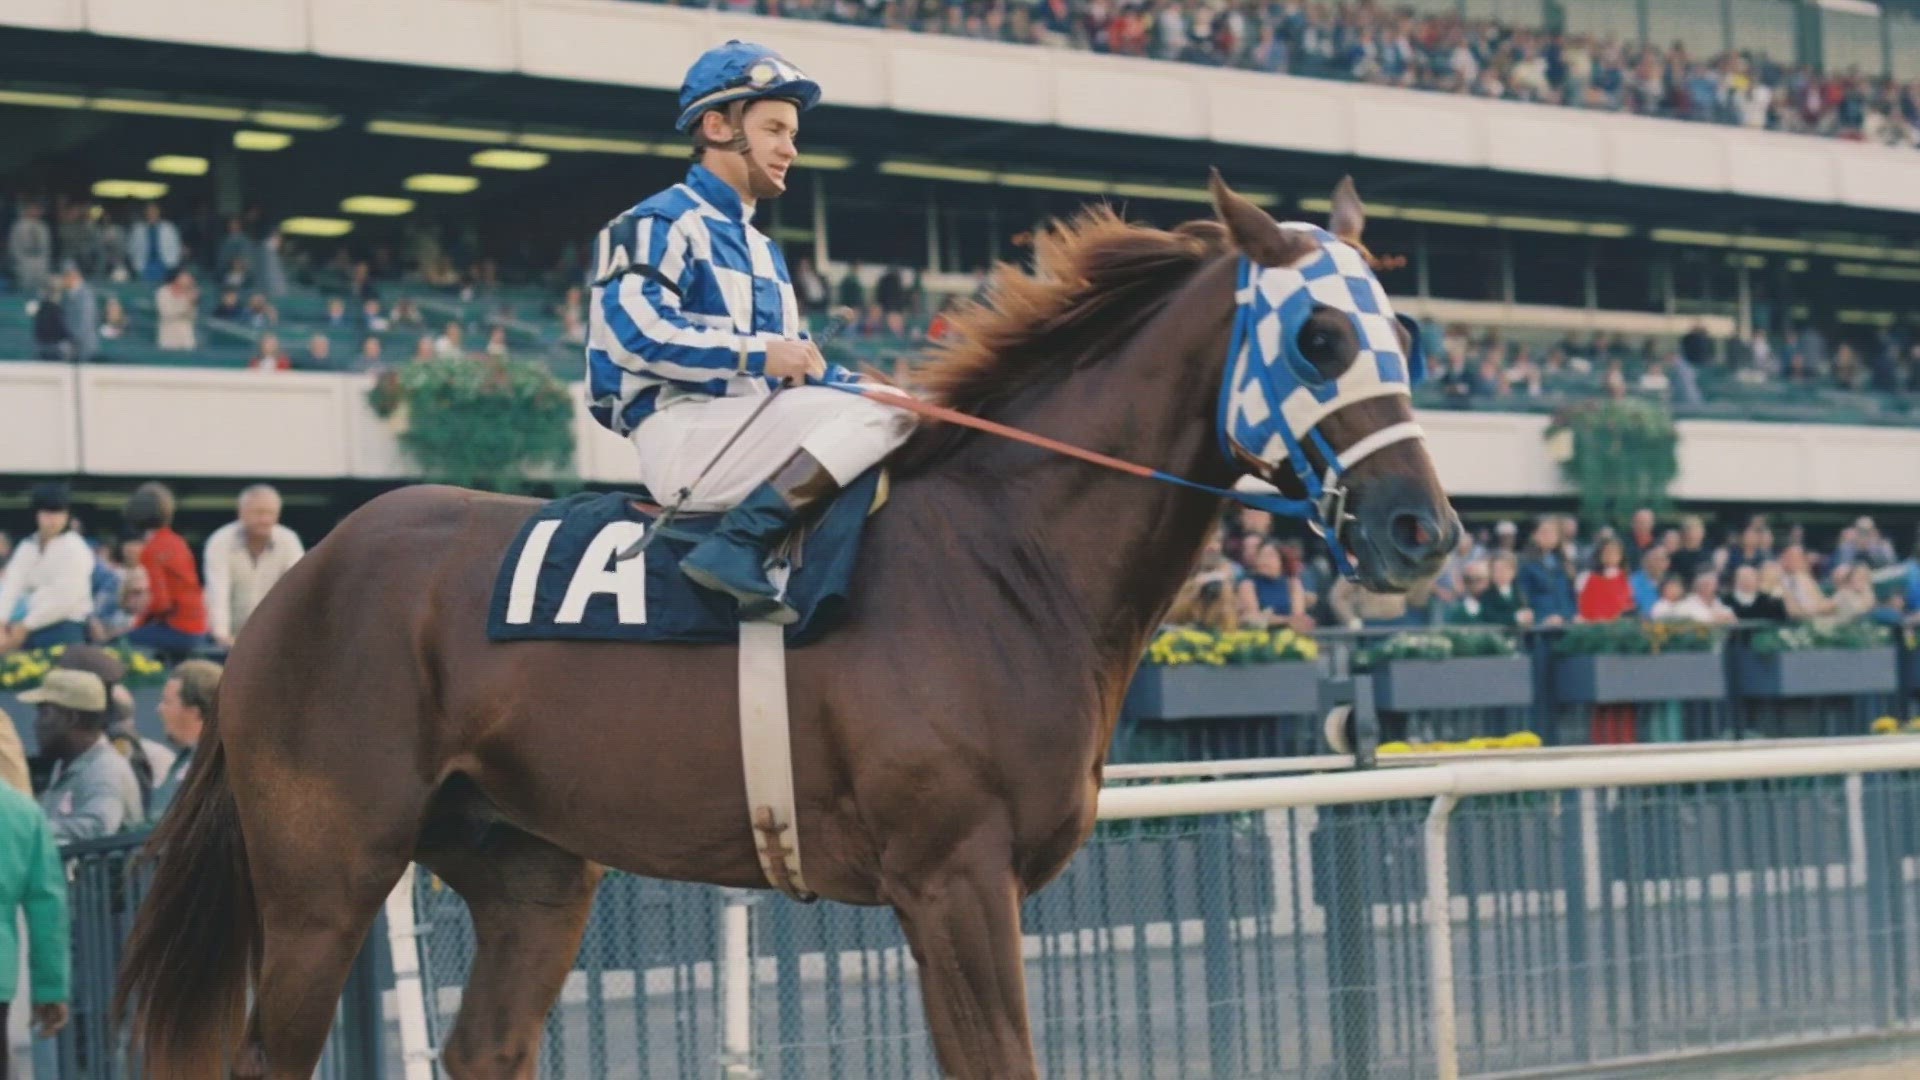 It wasn't until Secretariat's death that people learned what was driving him.